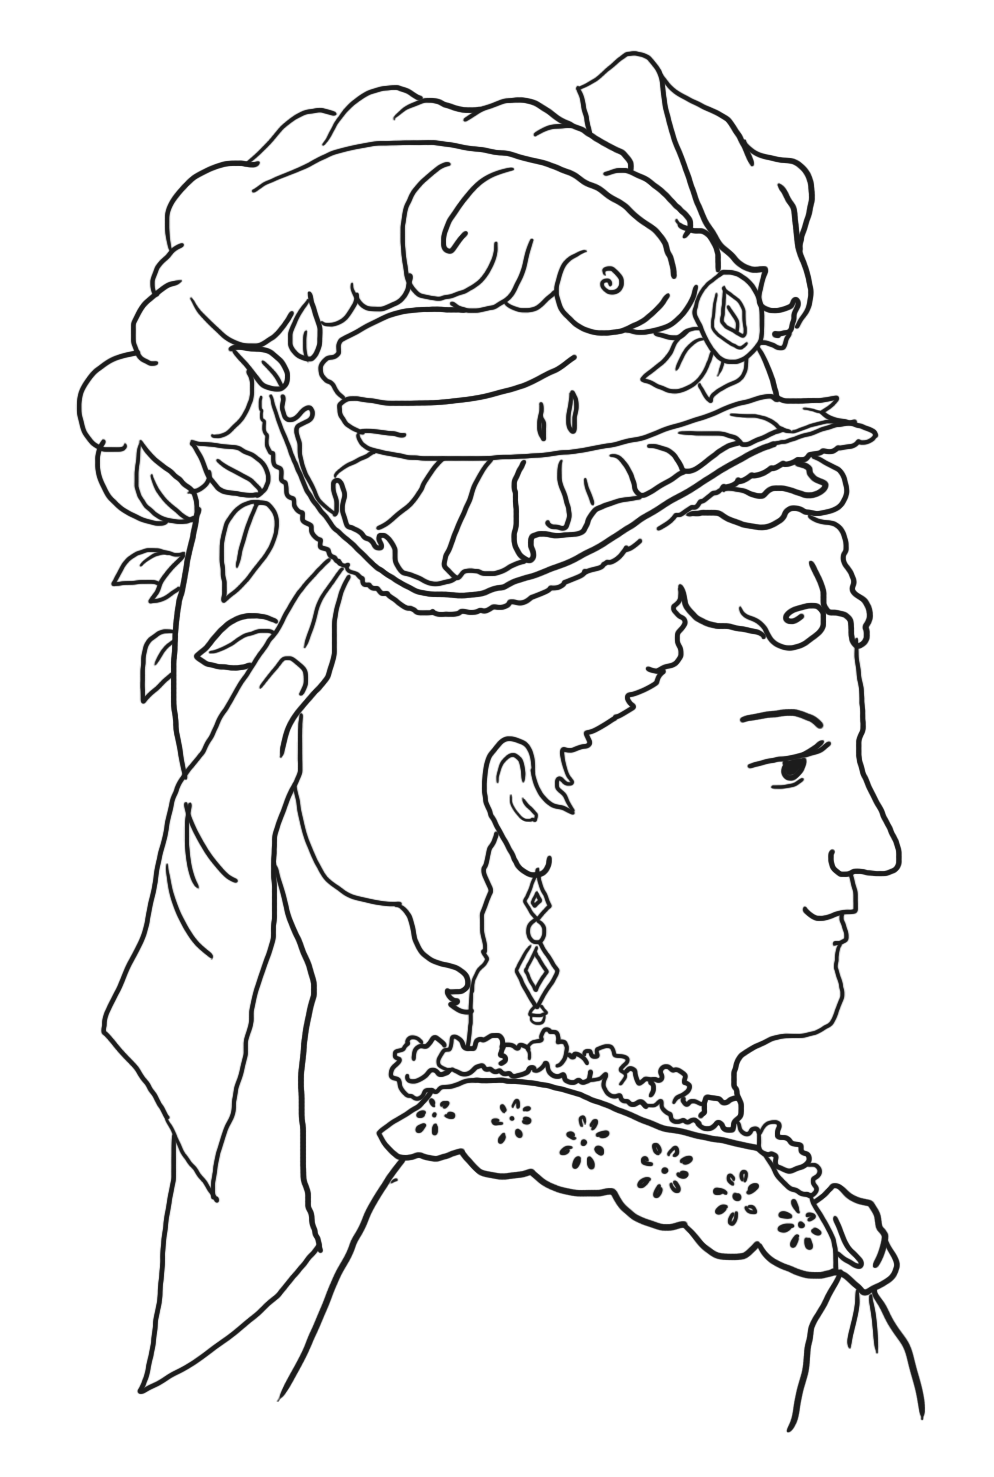 Victorian coloring page ladies' hat